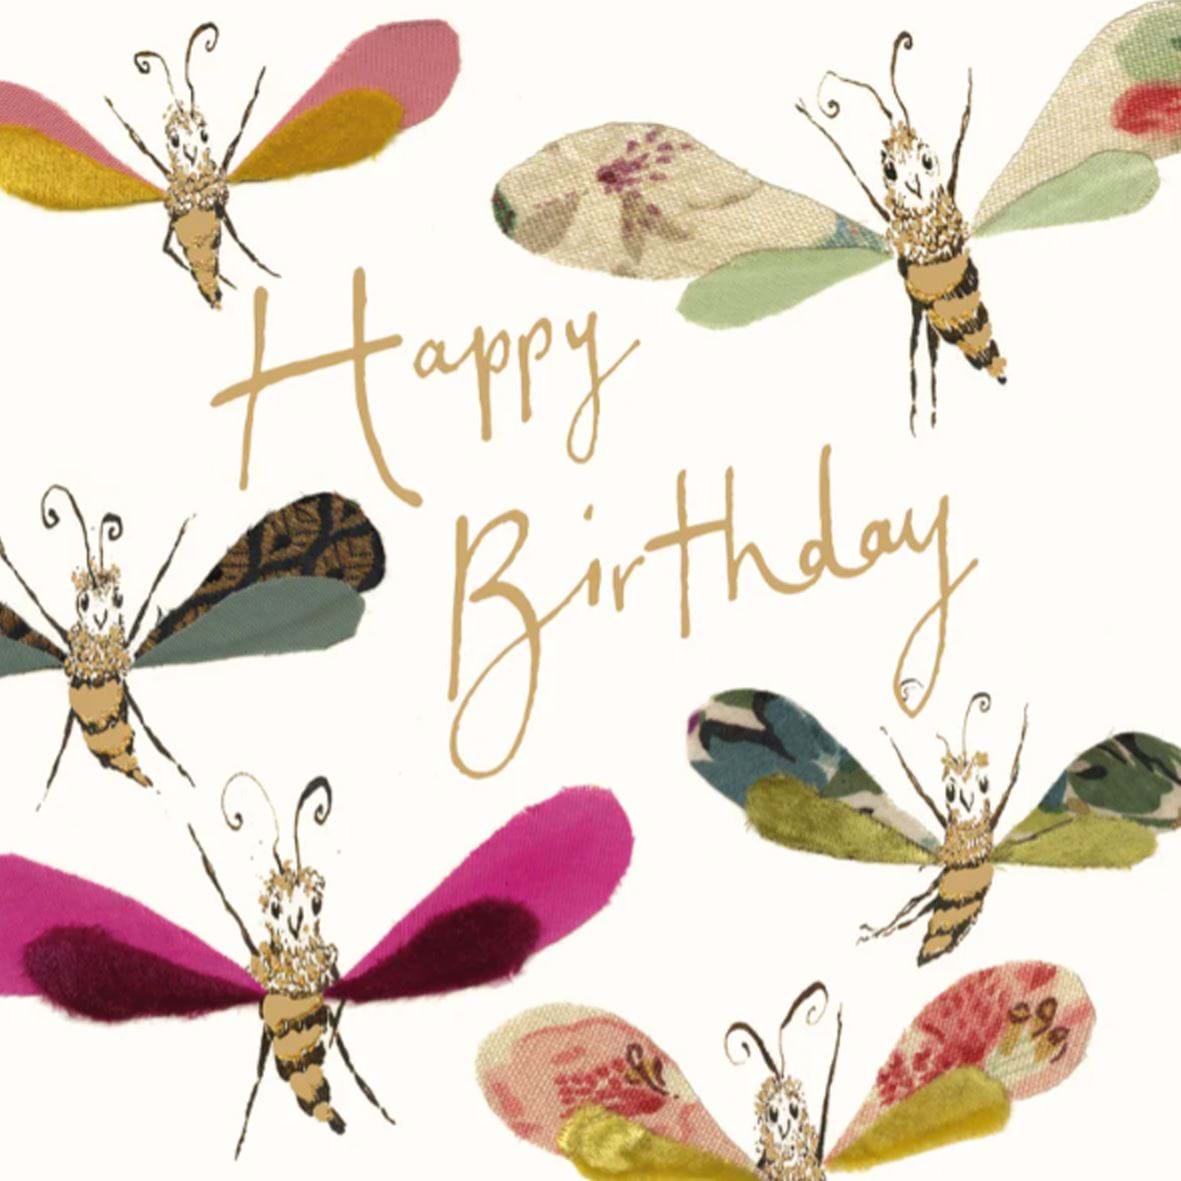 Busy Bees Birthday Card